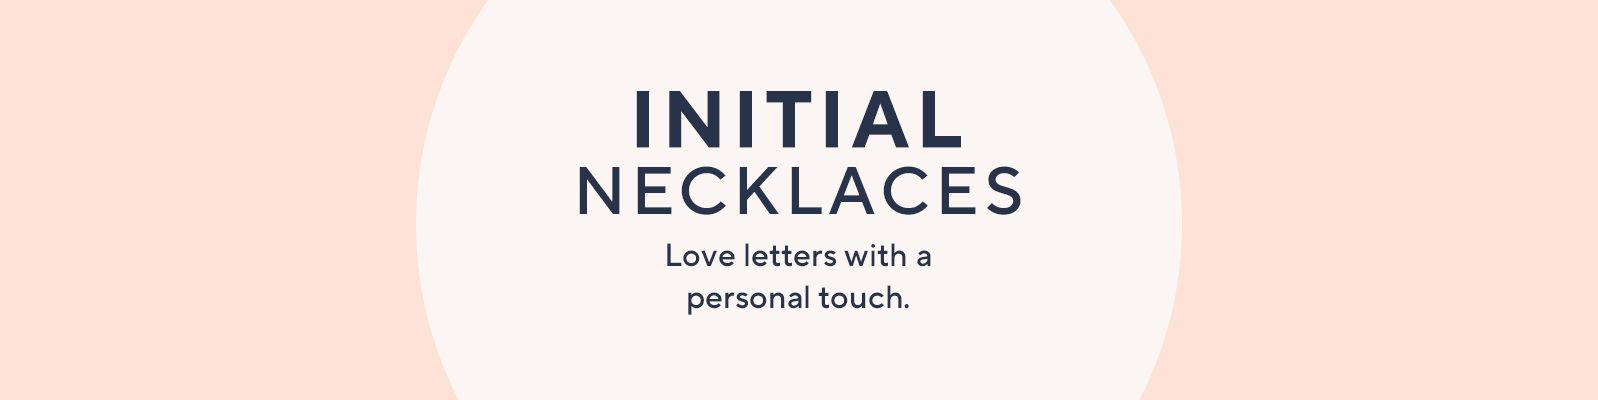 Initial Necklaces. Love letters with a personal touch.